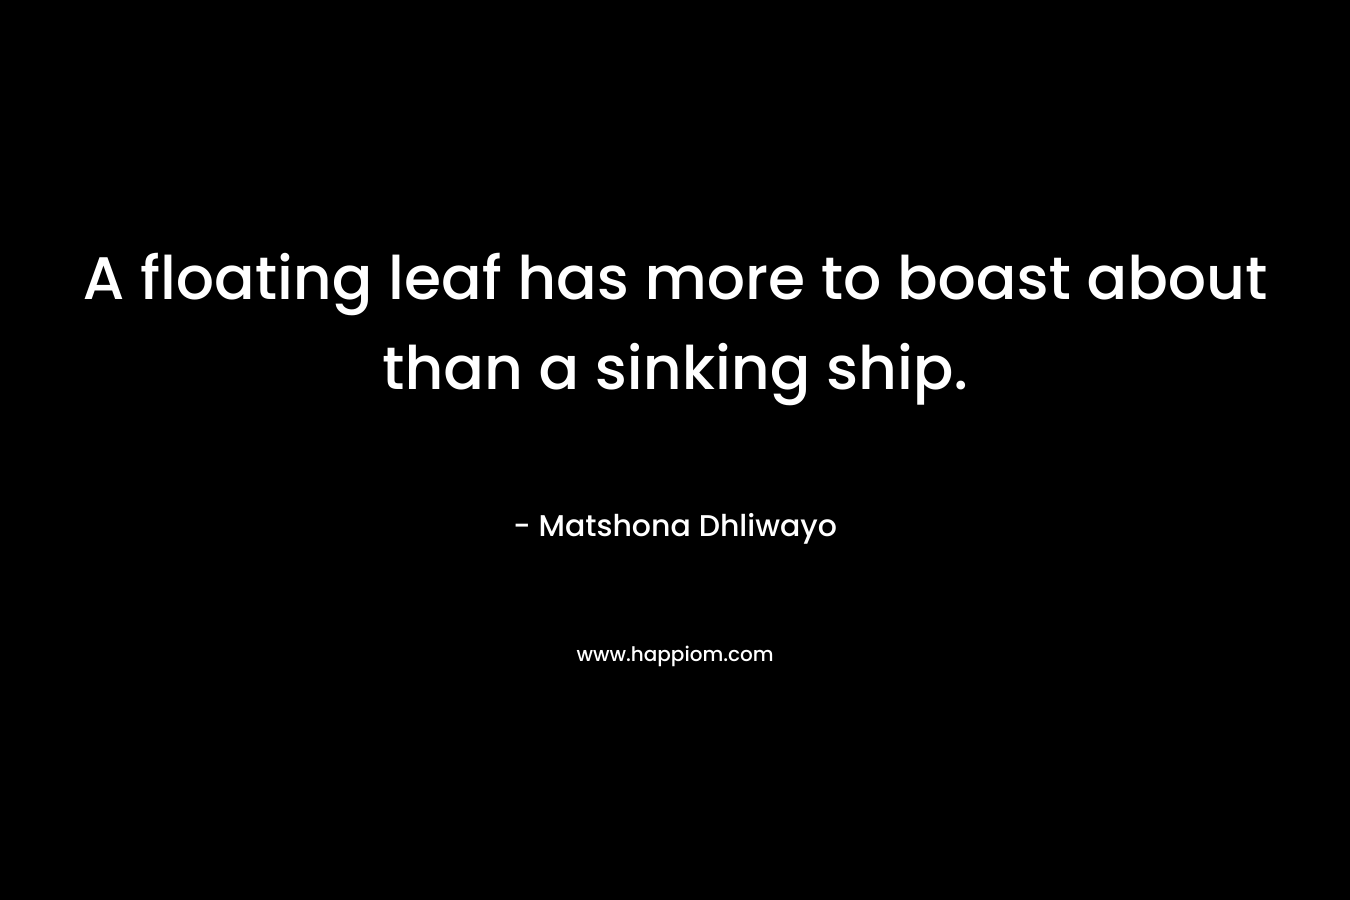 A floating leaf has more to boast about than a sinking ship. – Matshona Dhliwayo